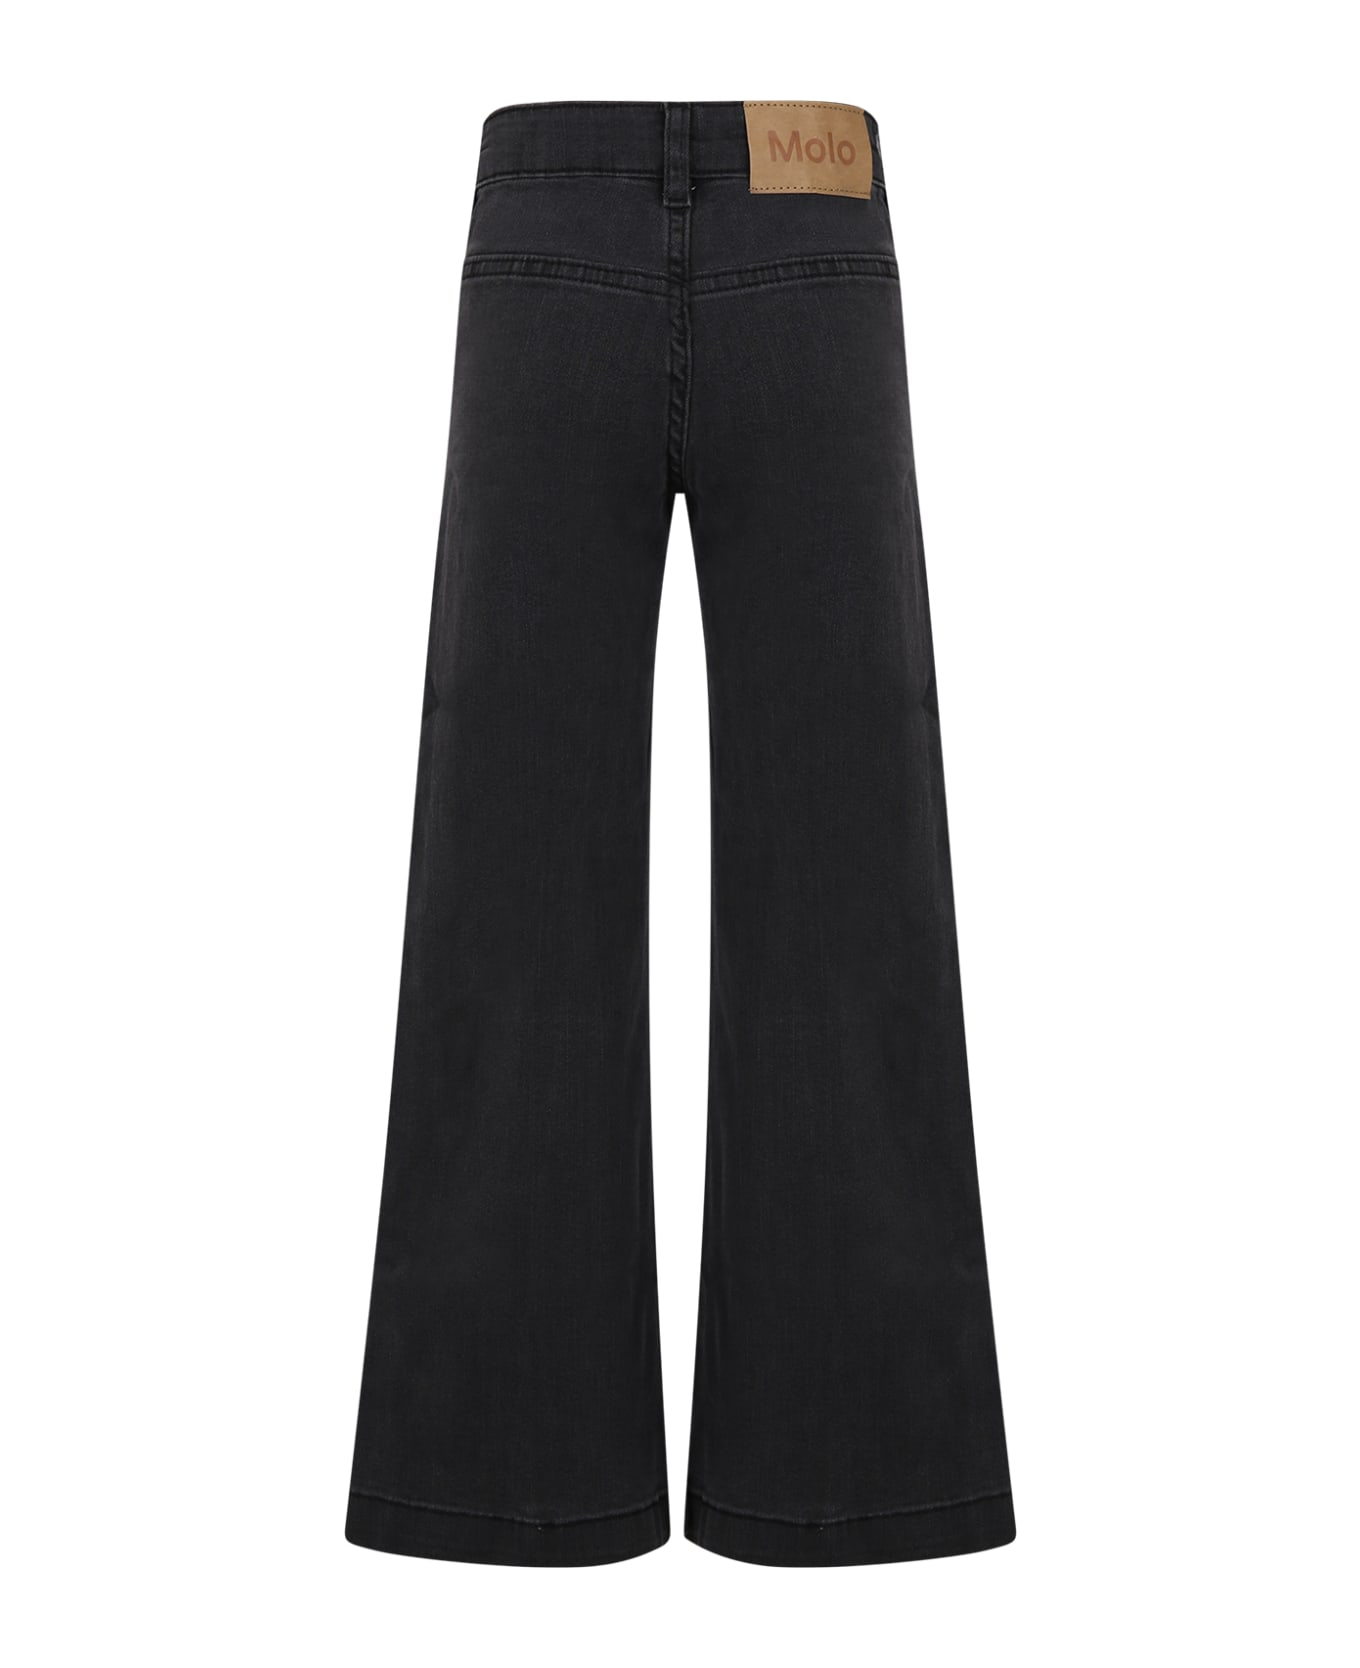 Molo Black Jeans For Girl With Logo - Black